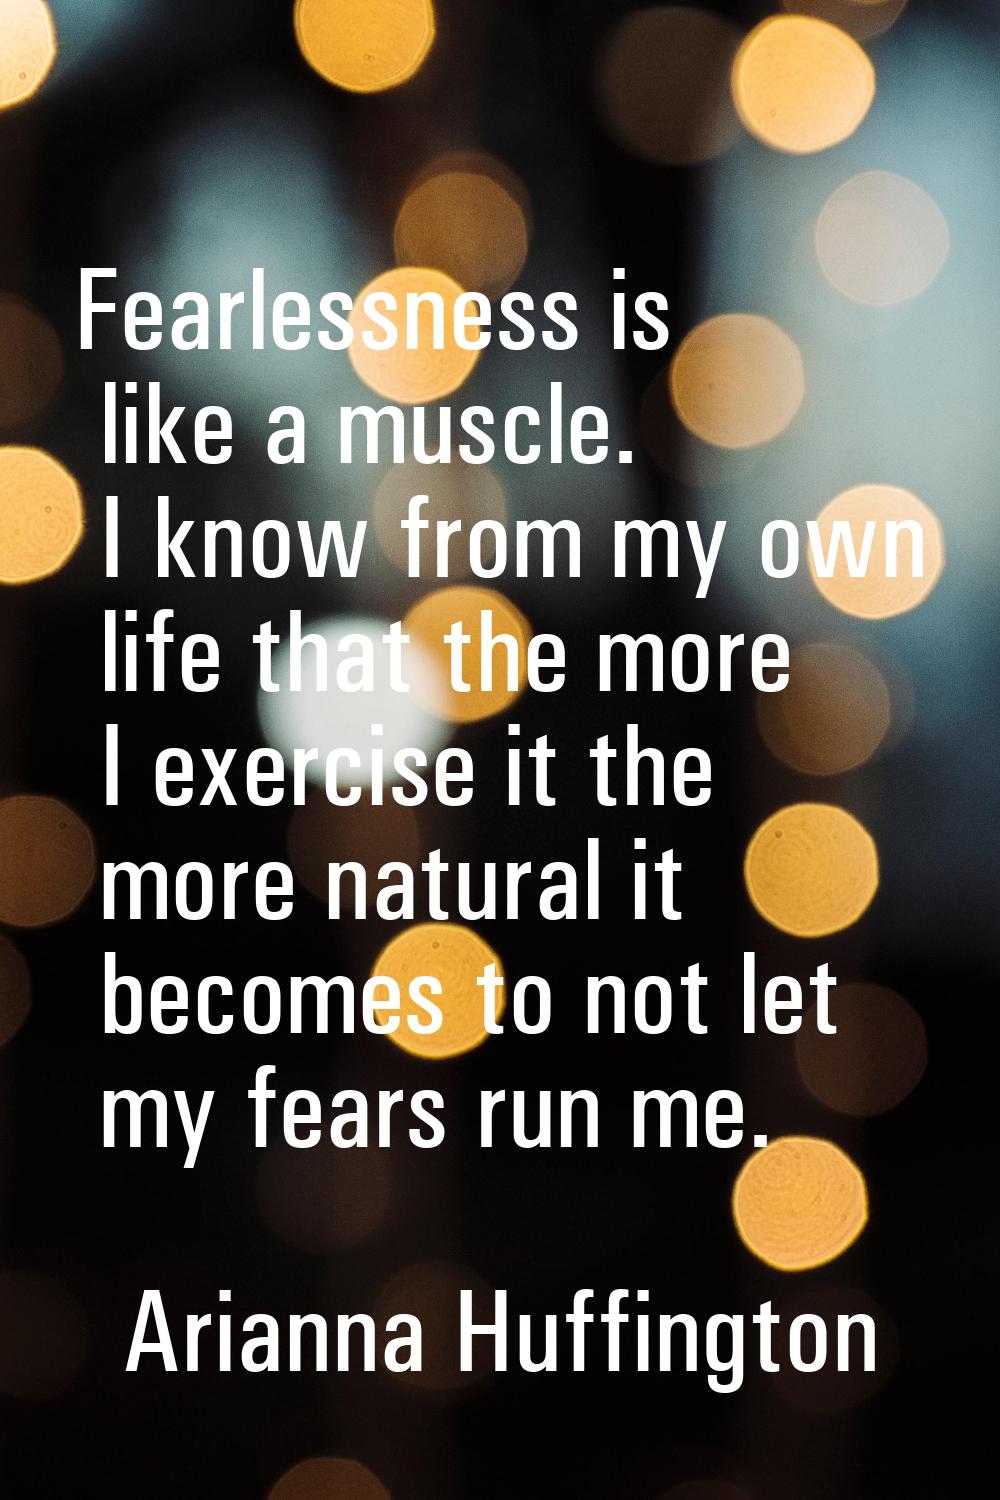 Fearlessness is like a muscle. I know from my own life that the more I exercise it the more natural